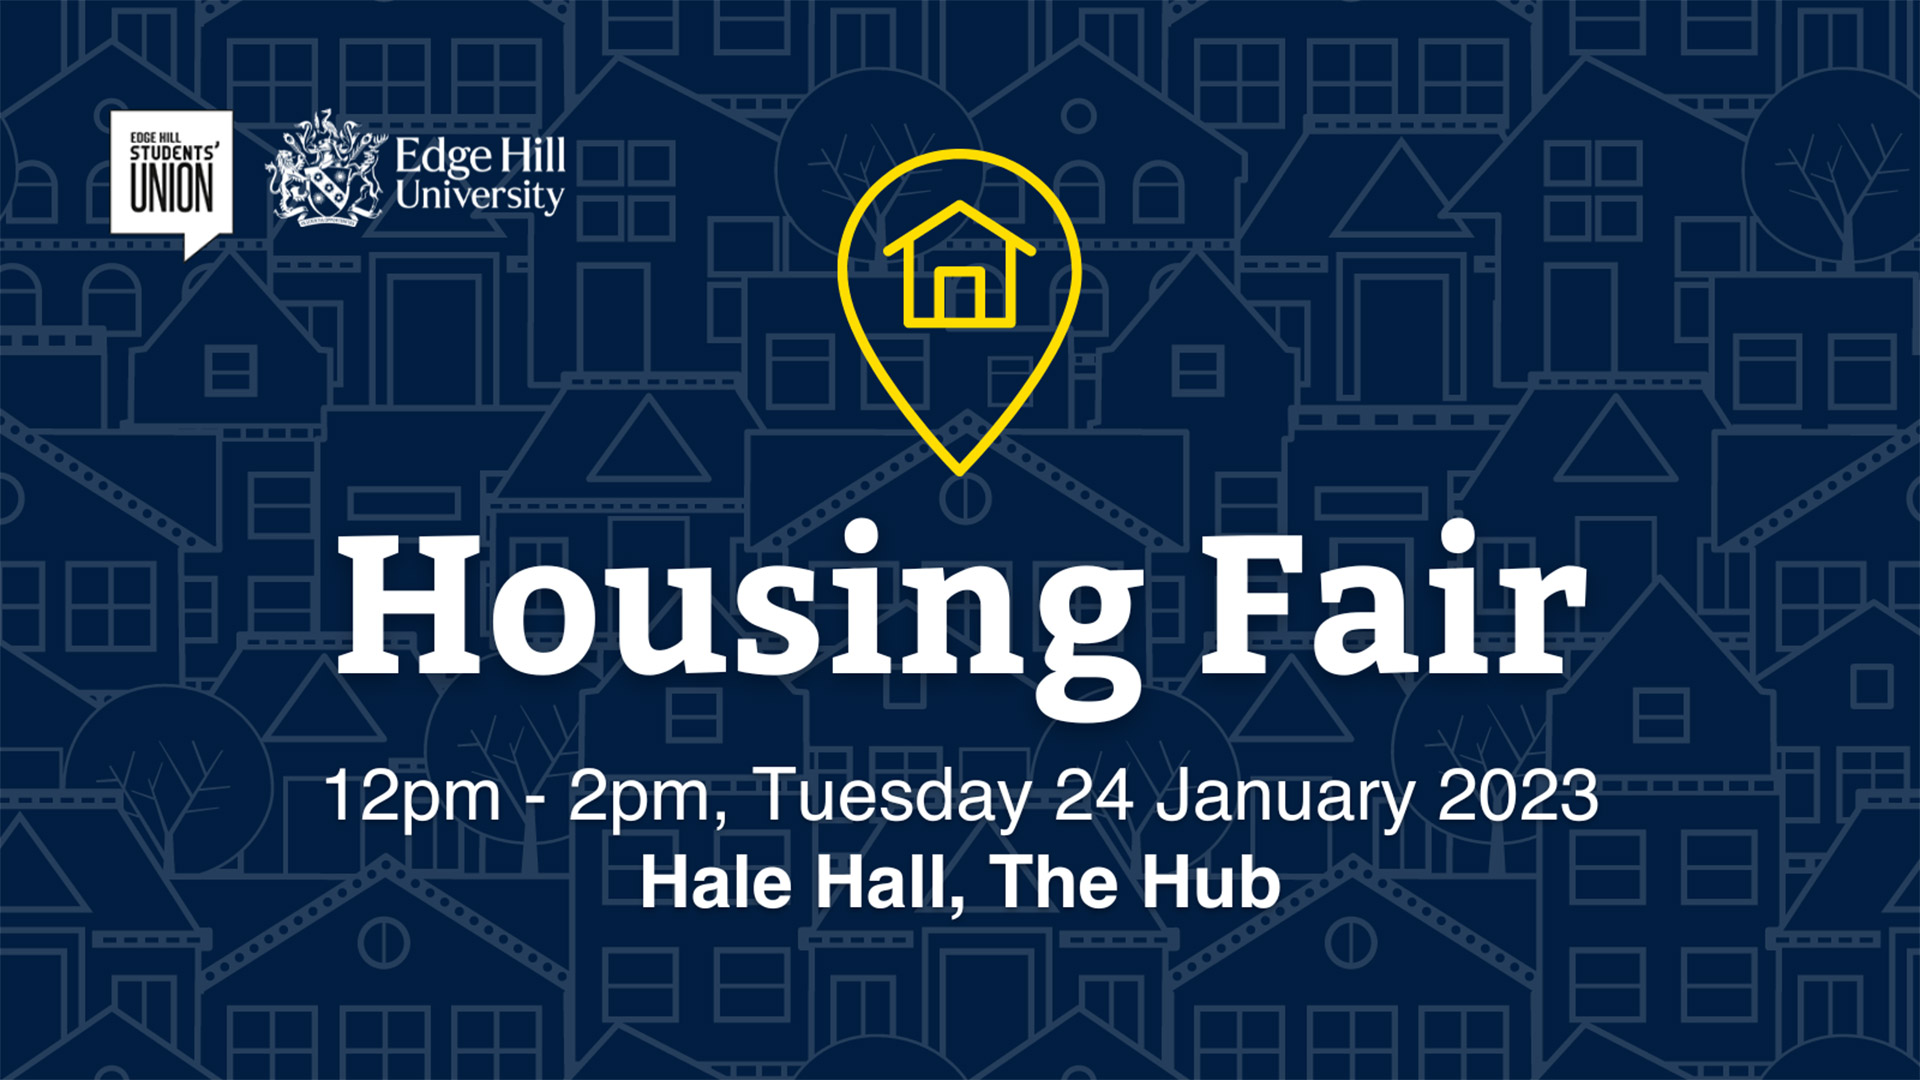 Housing Fair graphic showing the key information about the housing fair which is that it's on Tuesday 24 January, 12-2pm in The Hub